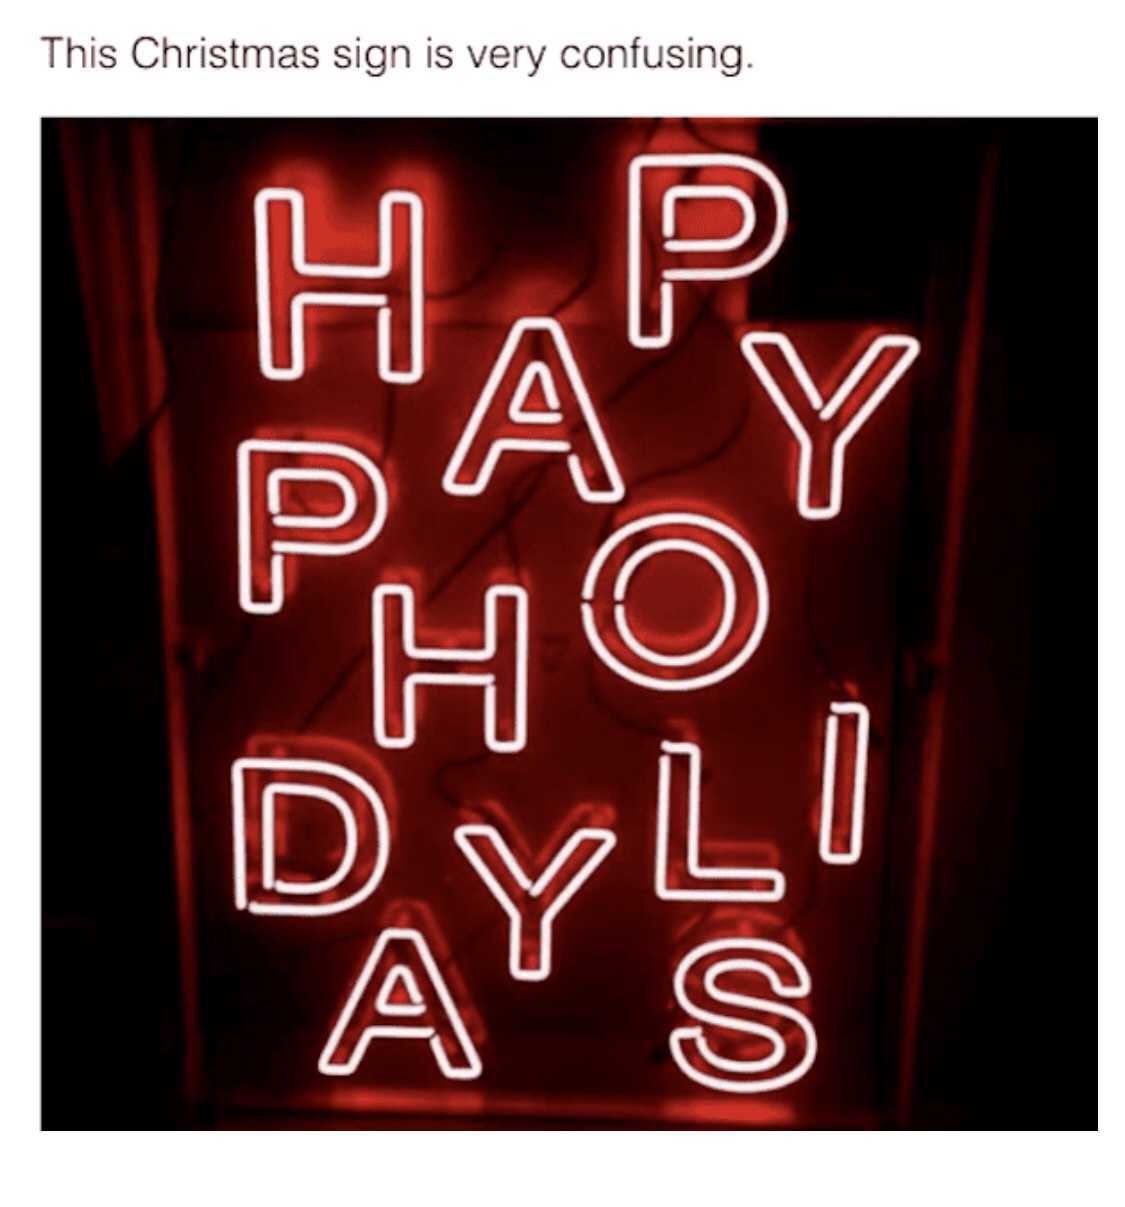 neon - This Christmas sign is very confusing. H P. Ay H D A A S